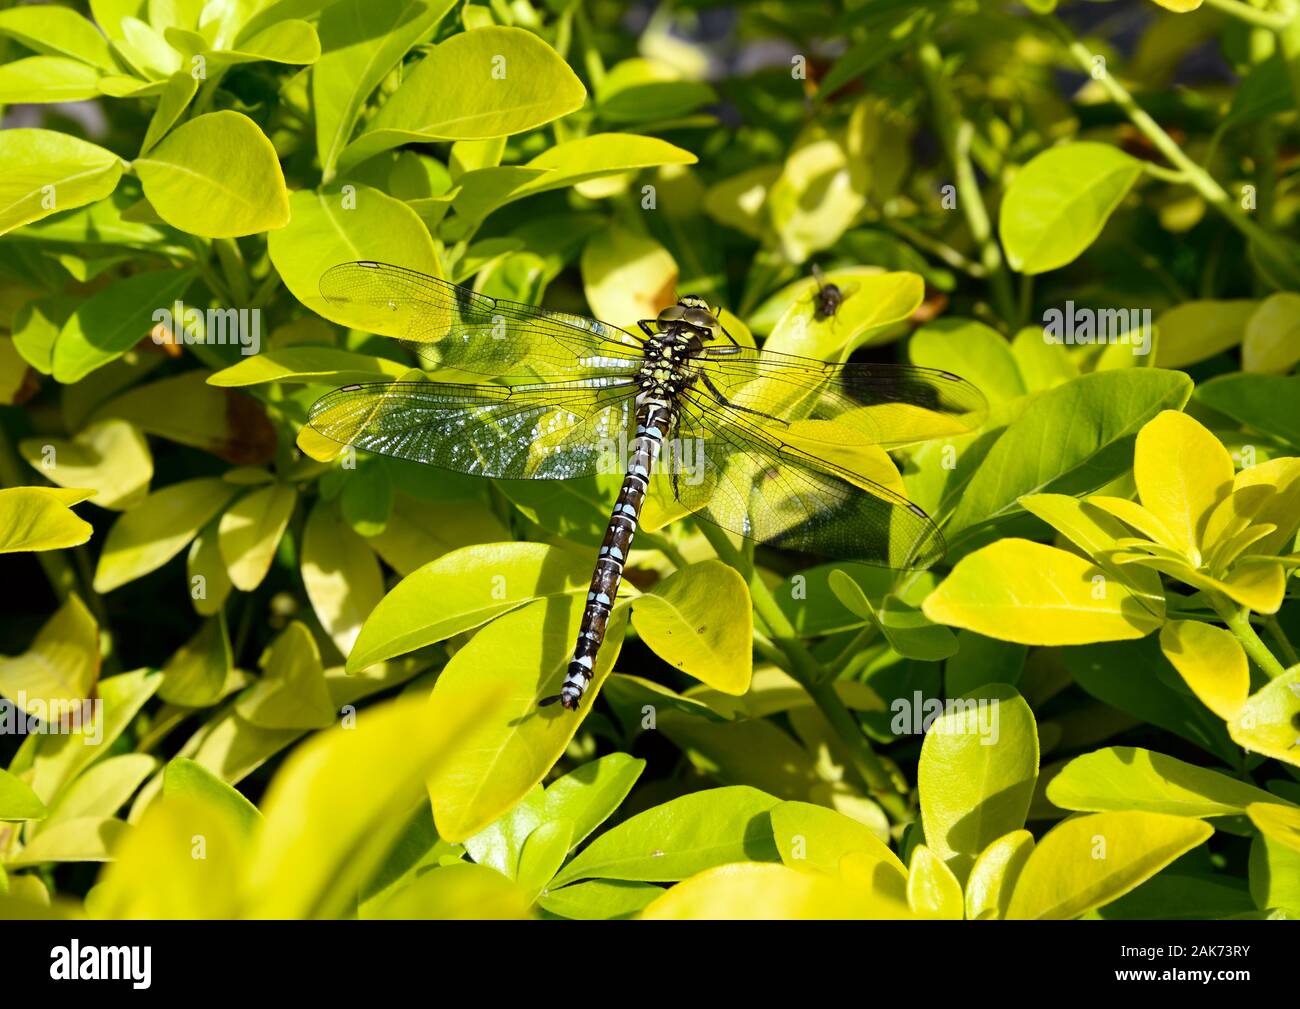 Large Dragonfly resting on a yellow bush in a n English garden in summertime Stock Photo